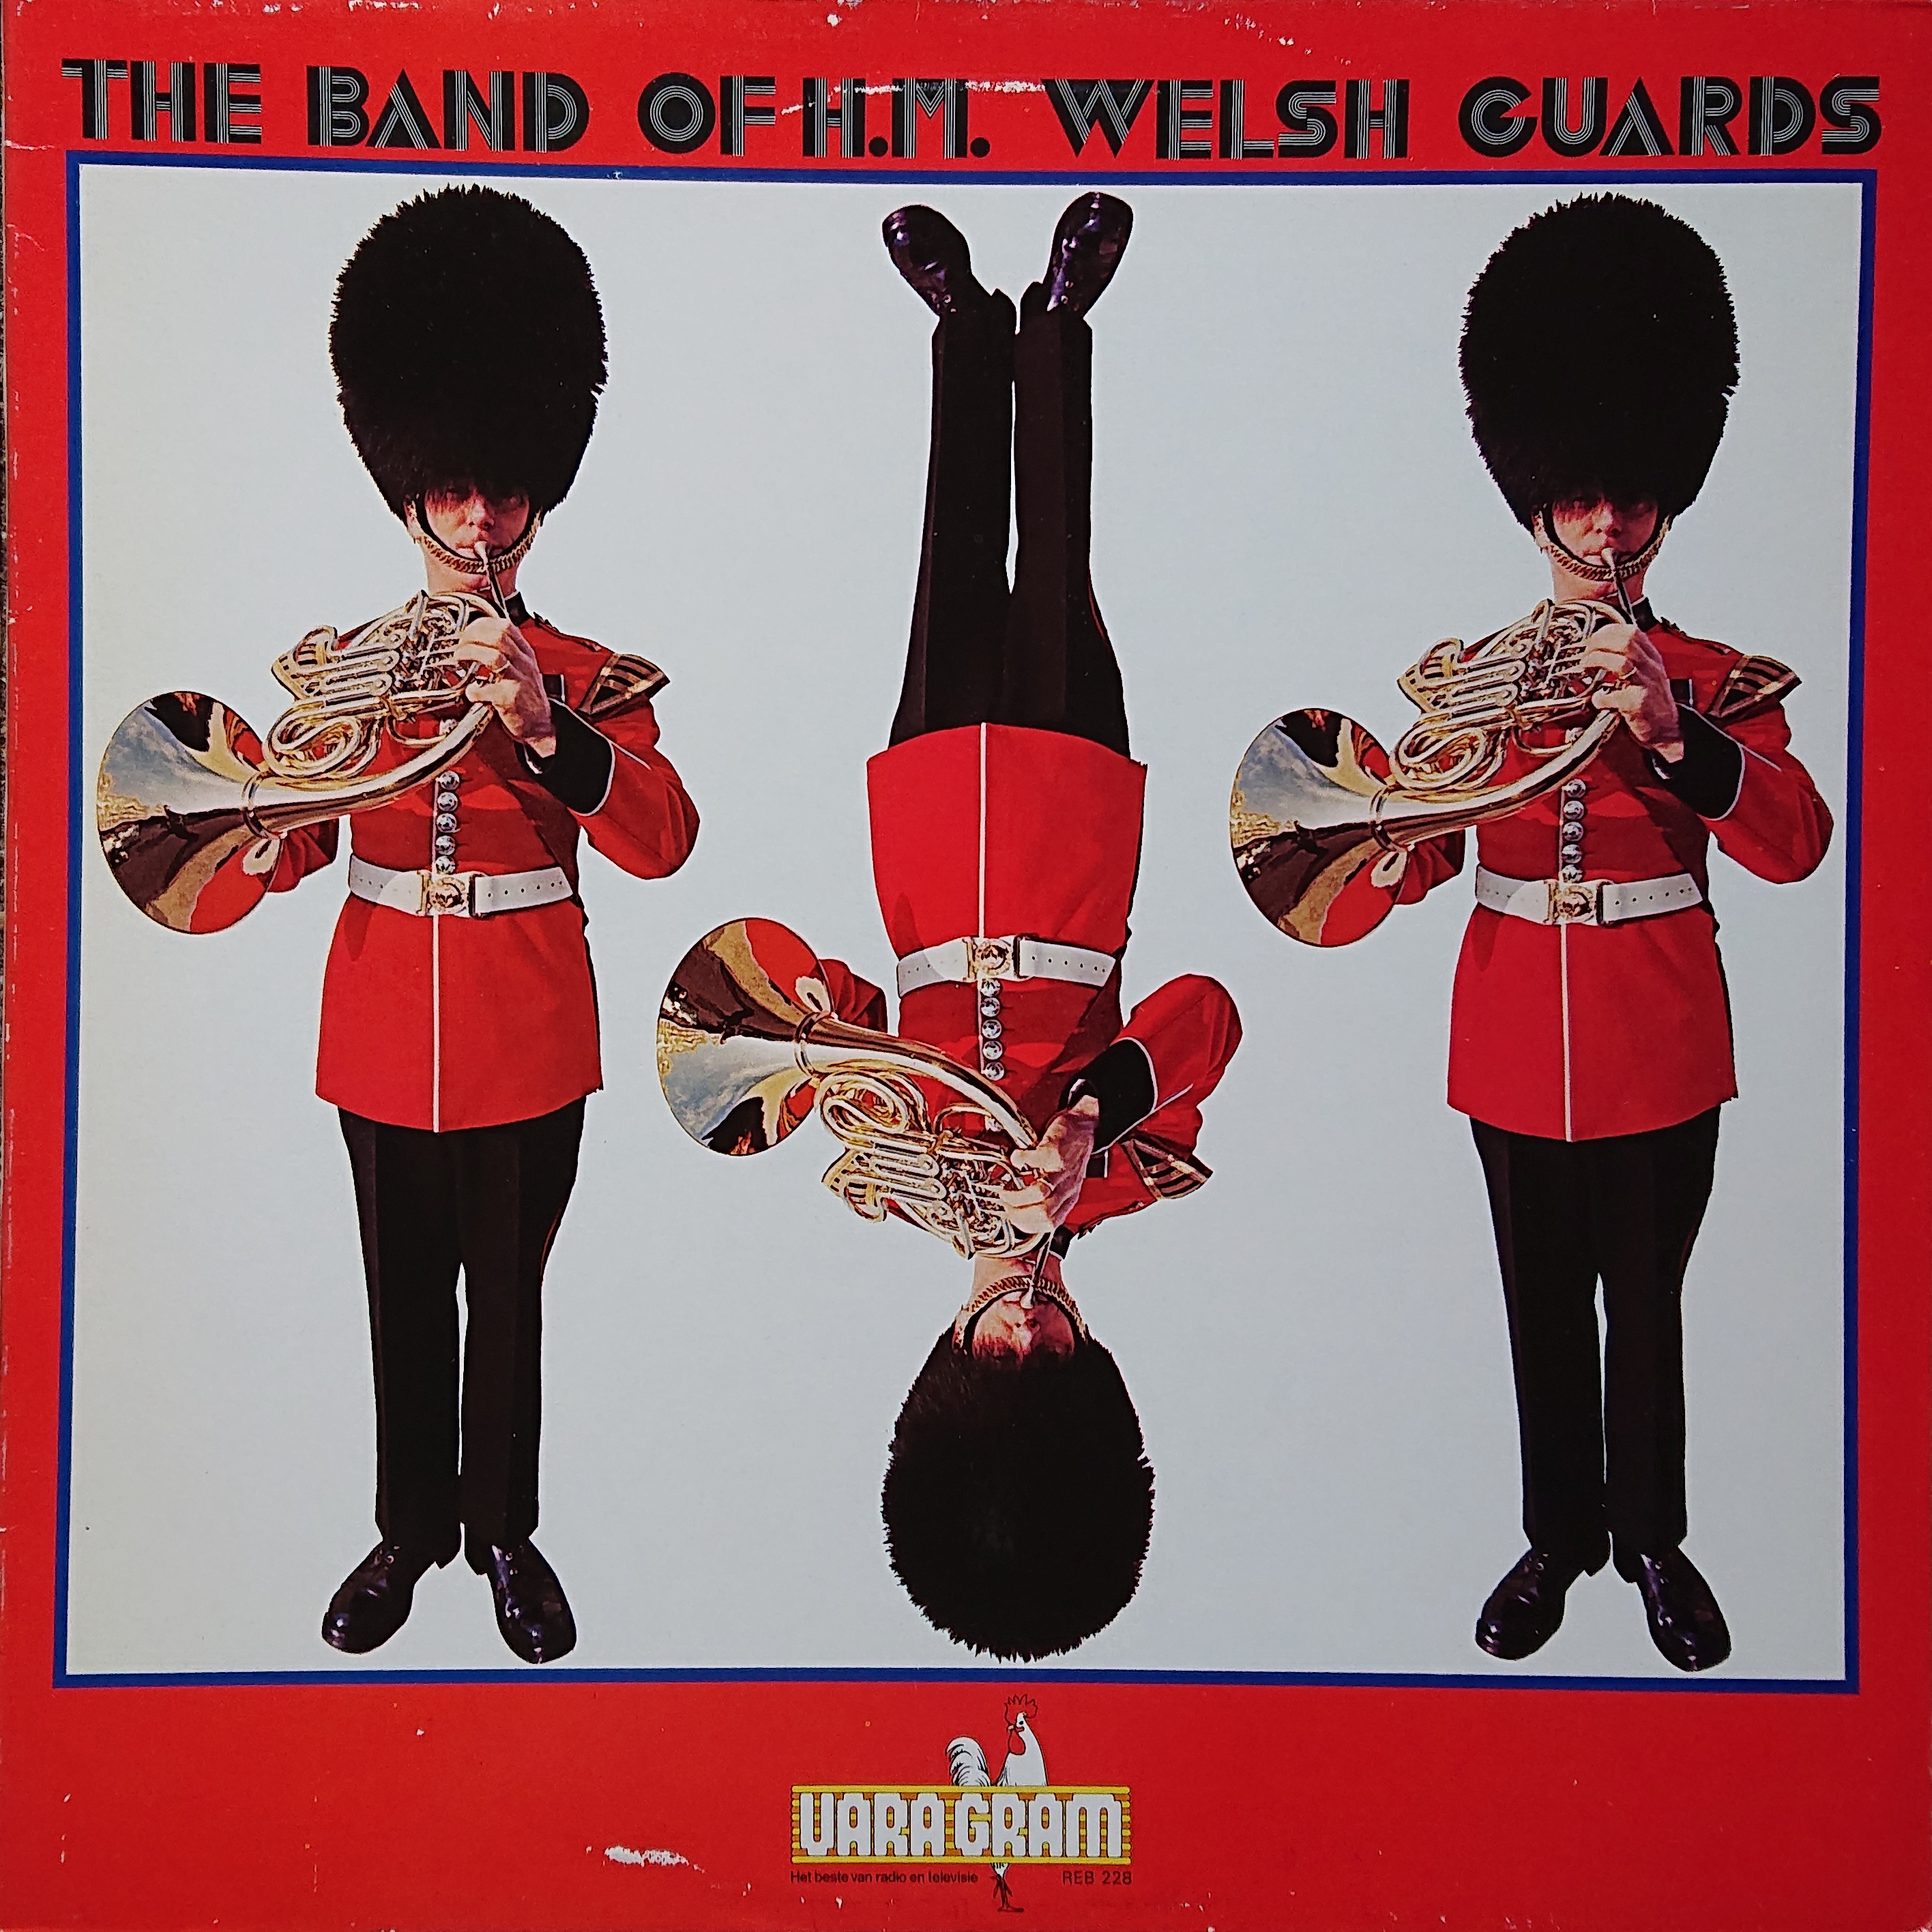 Picture of Hands across the sea by artist The Band of the Welsh Guards from the BBC albums - Records and Tapes library